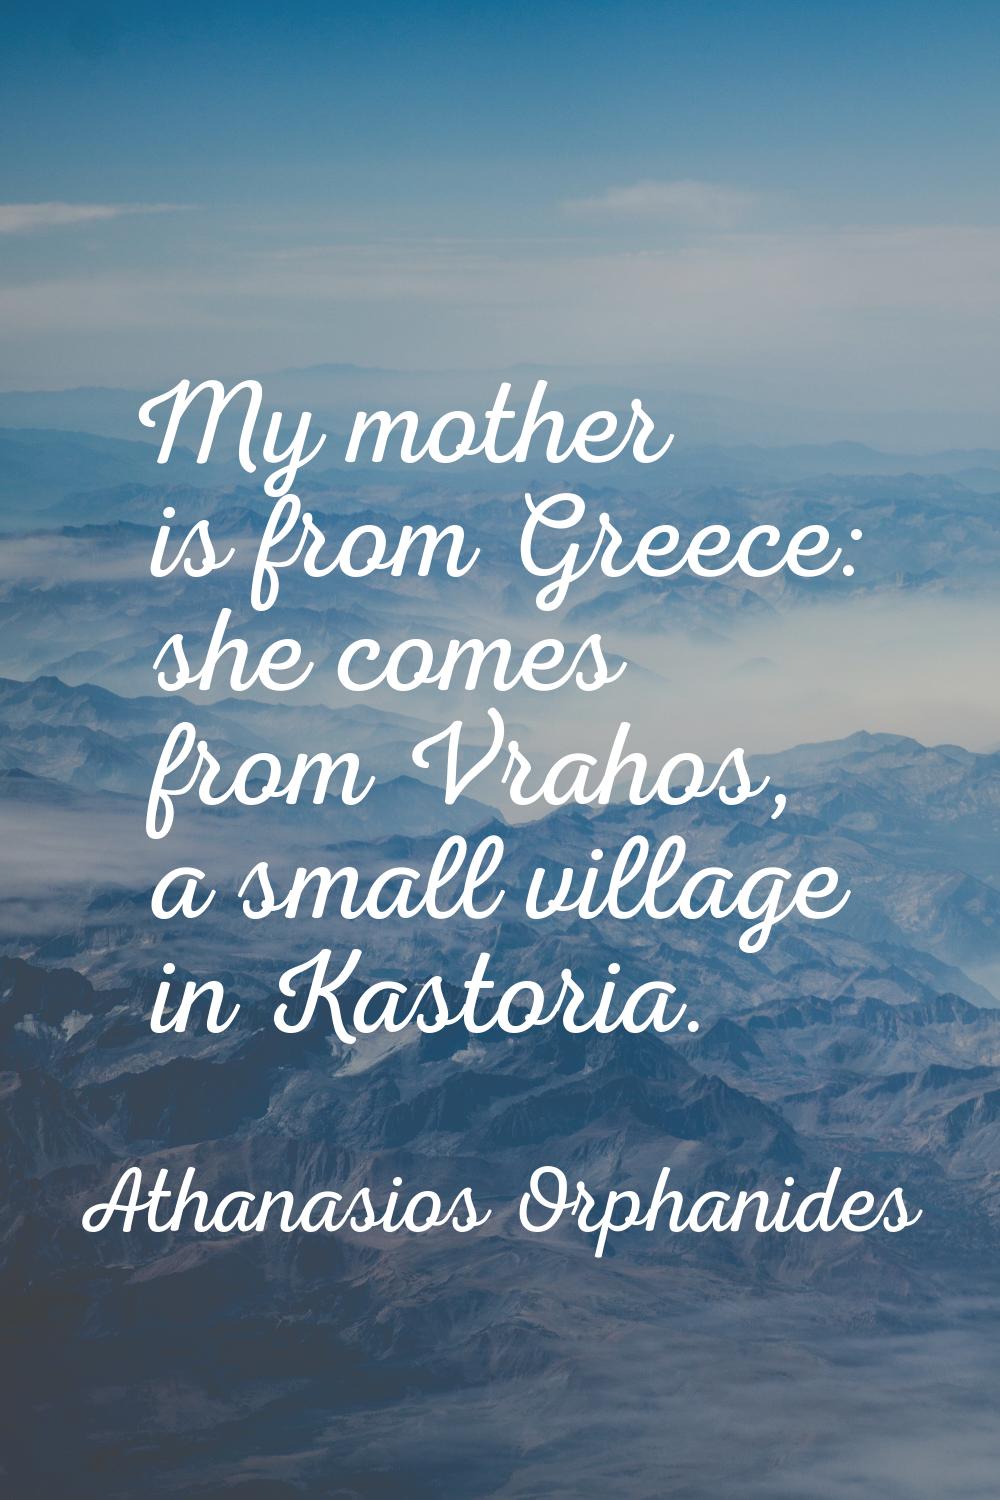 My mother is from Greece: she comes from Vrahos, a small village in Kastoria.